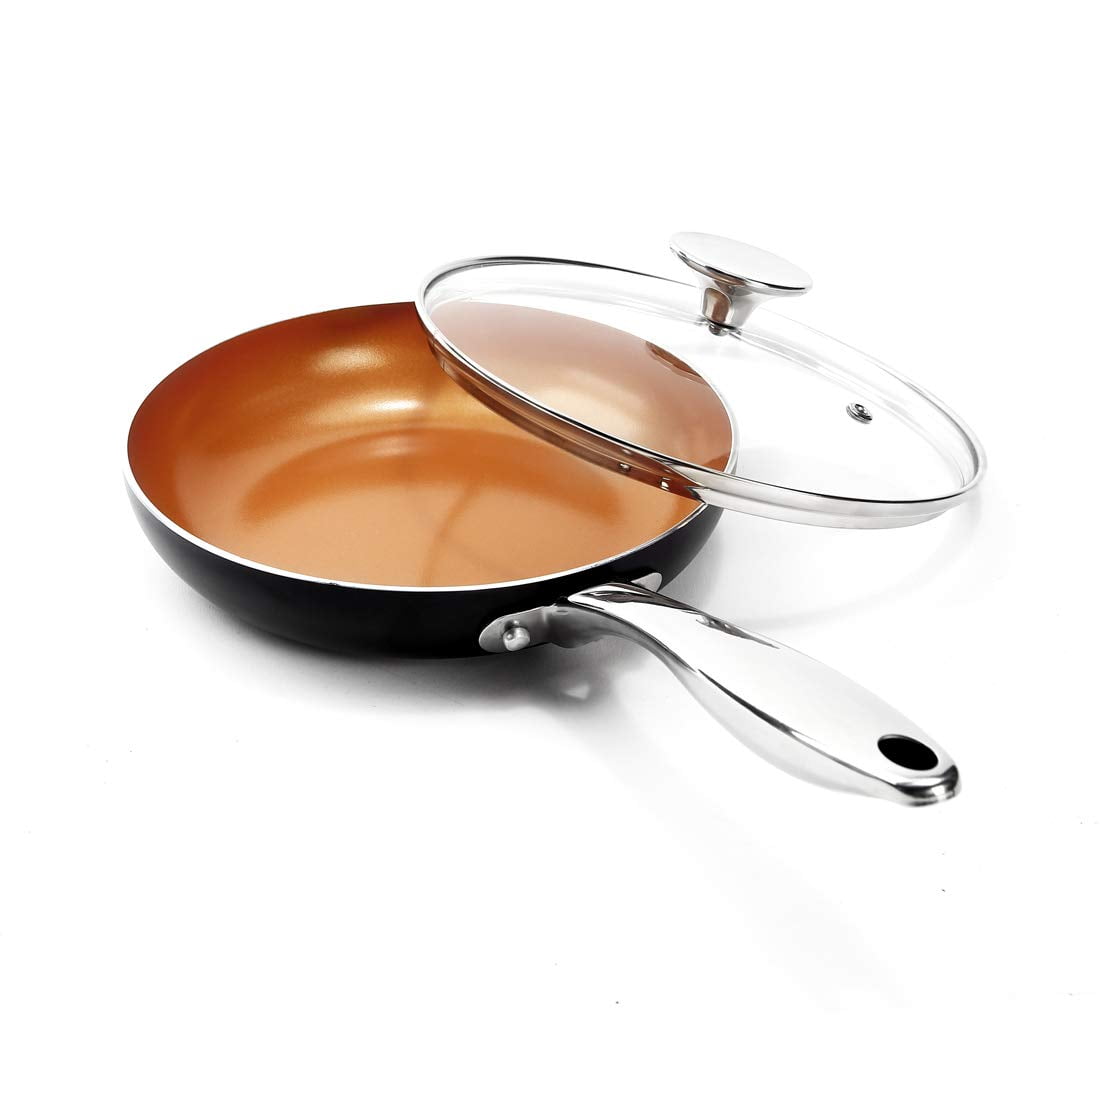 Details about   Non Stick Kitchen Fry Pan Skillet Omelette Cookware 8 inch/10 inch/11 inch